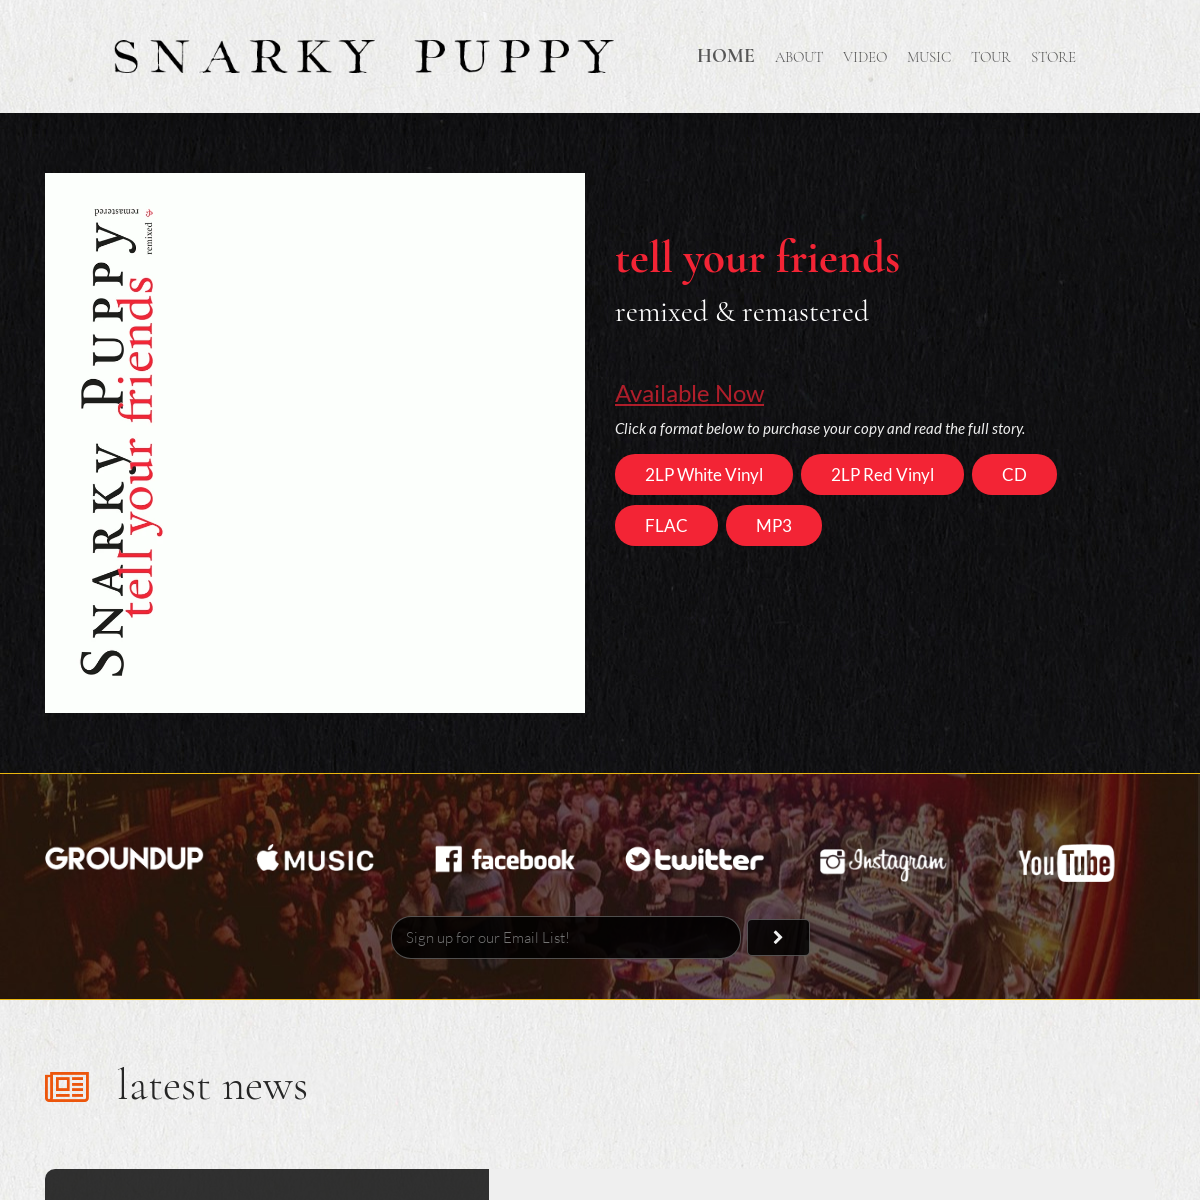 A complete backup of snarkypuppy.com